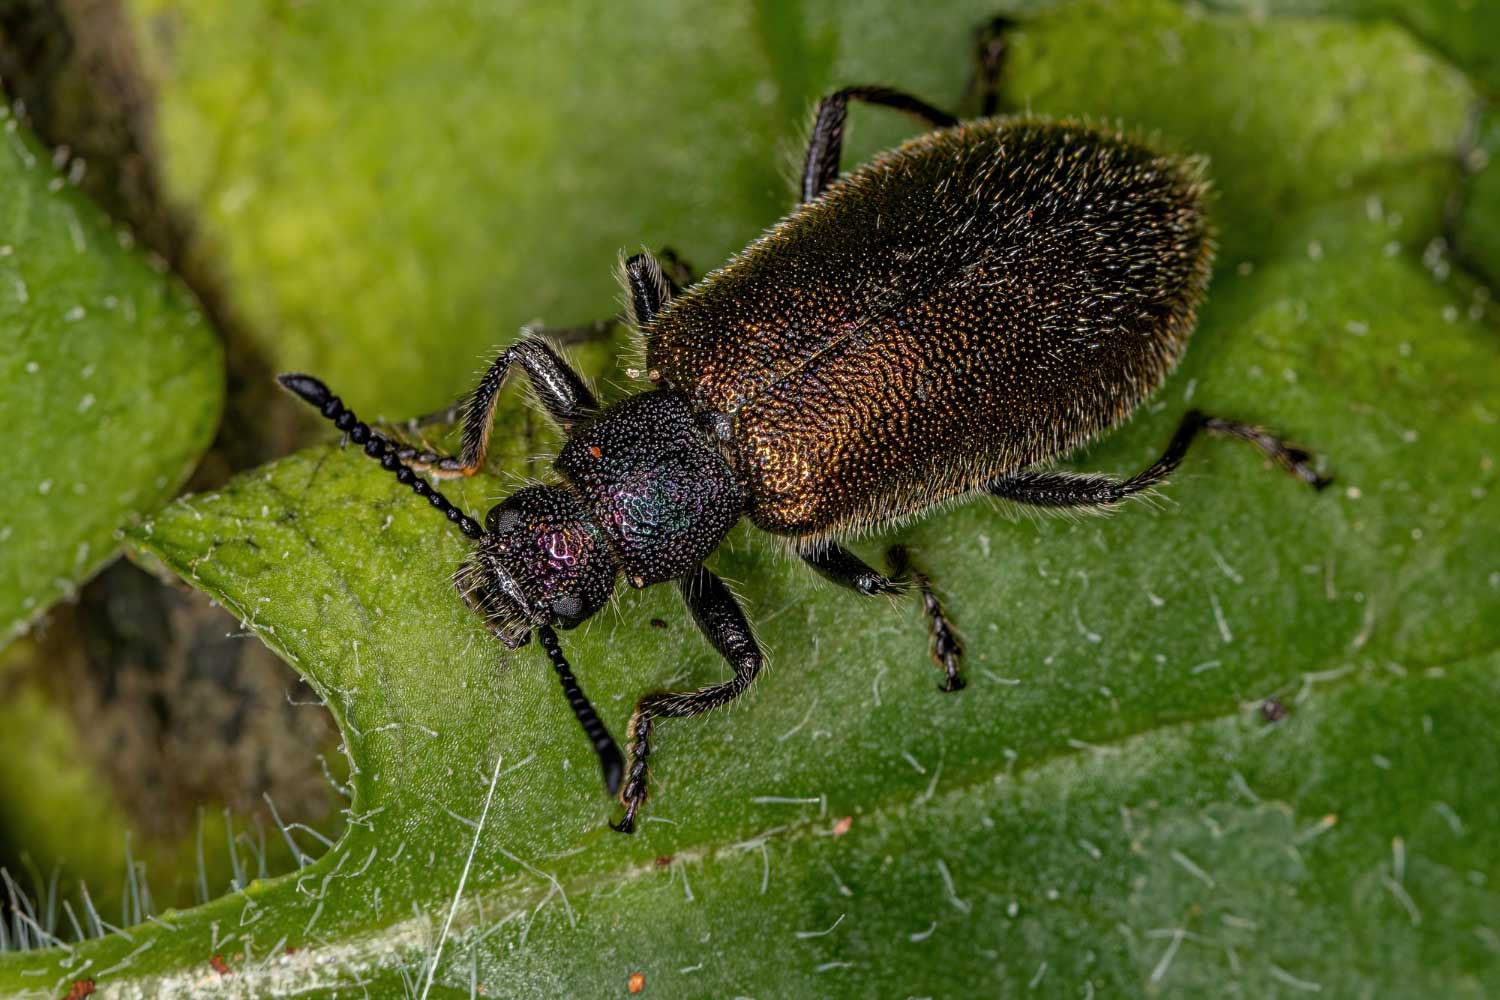 Adult long-jointed beetle of the species lagria villosa